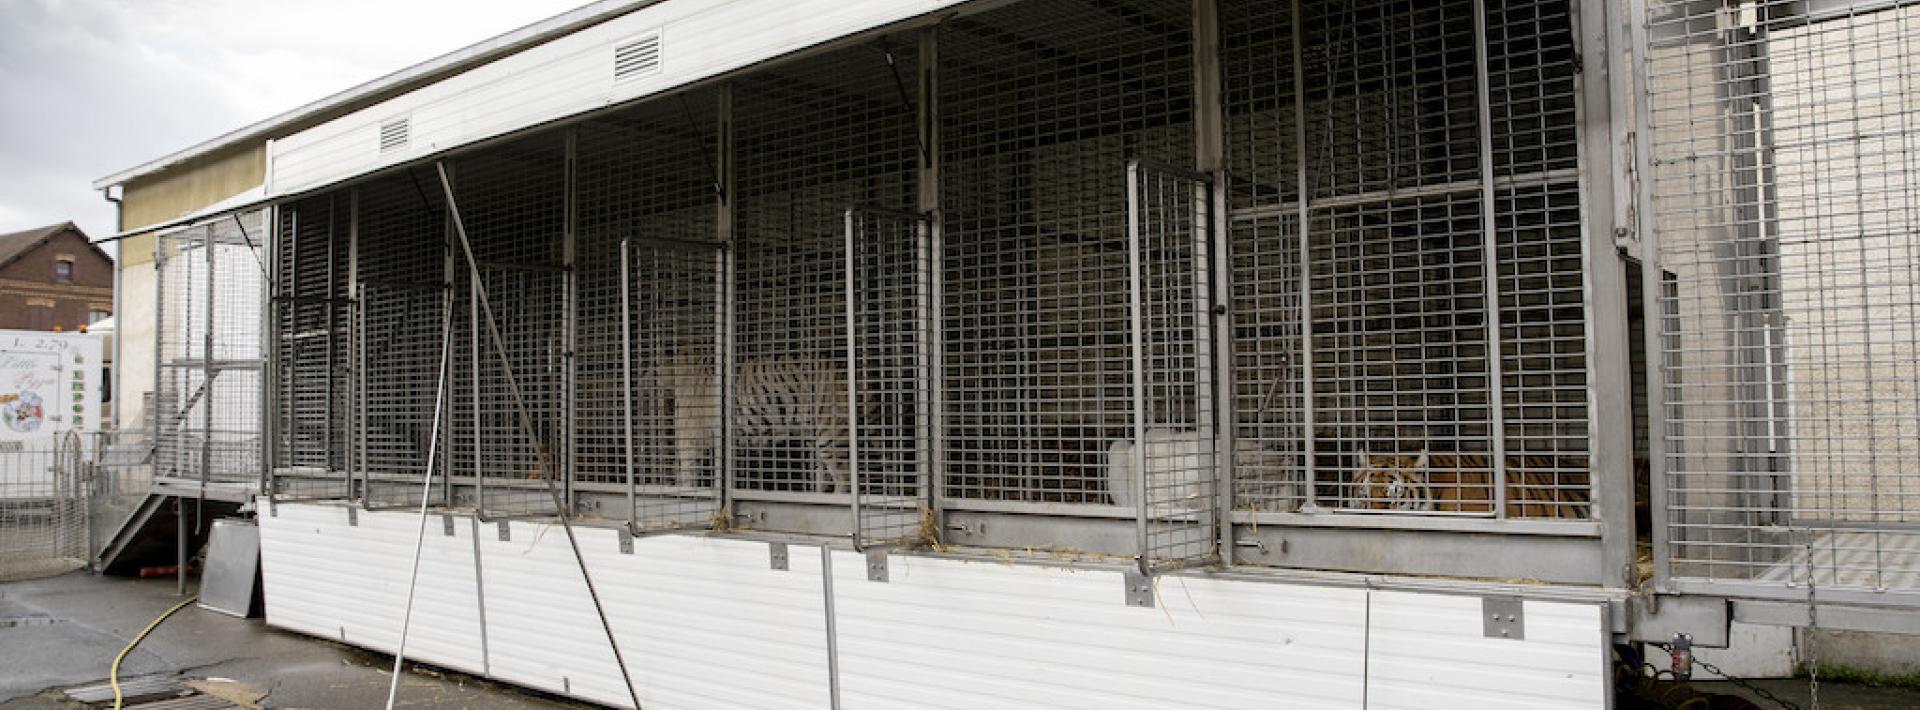 tiger truck cage